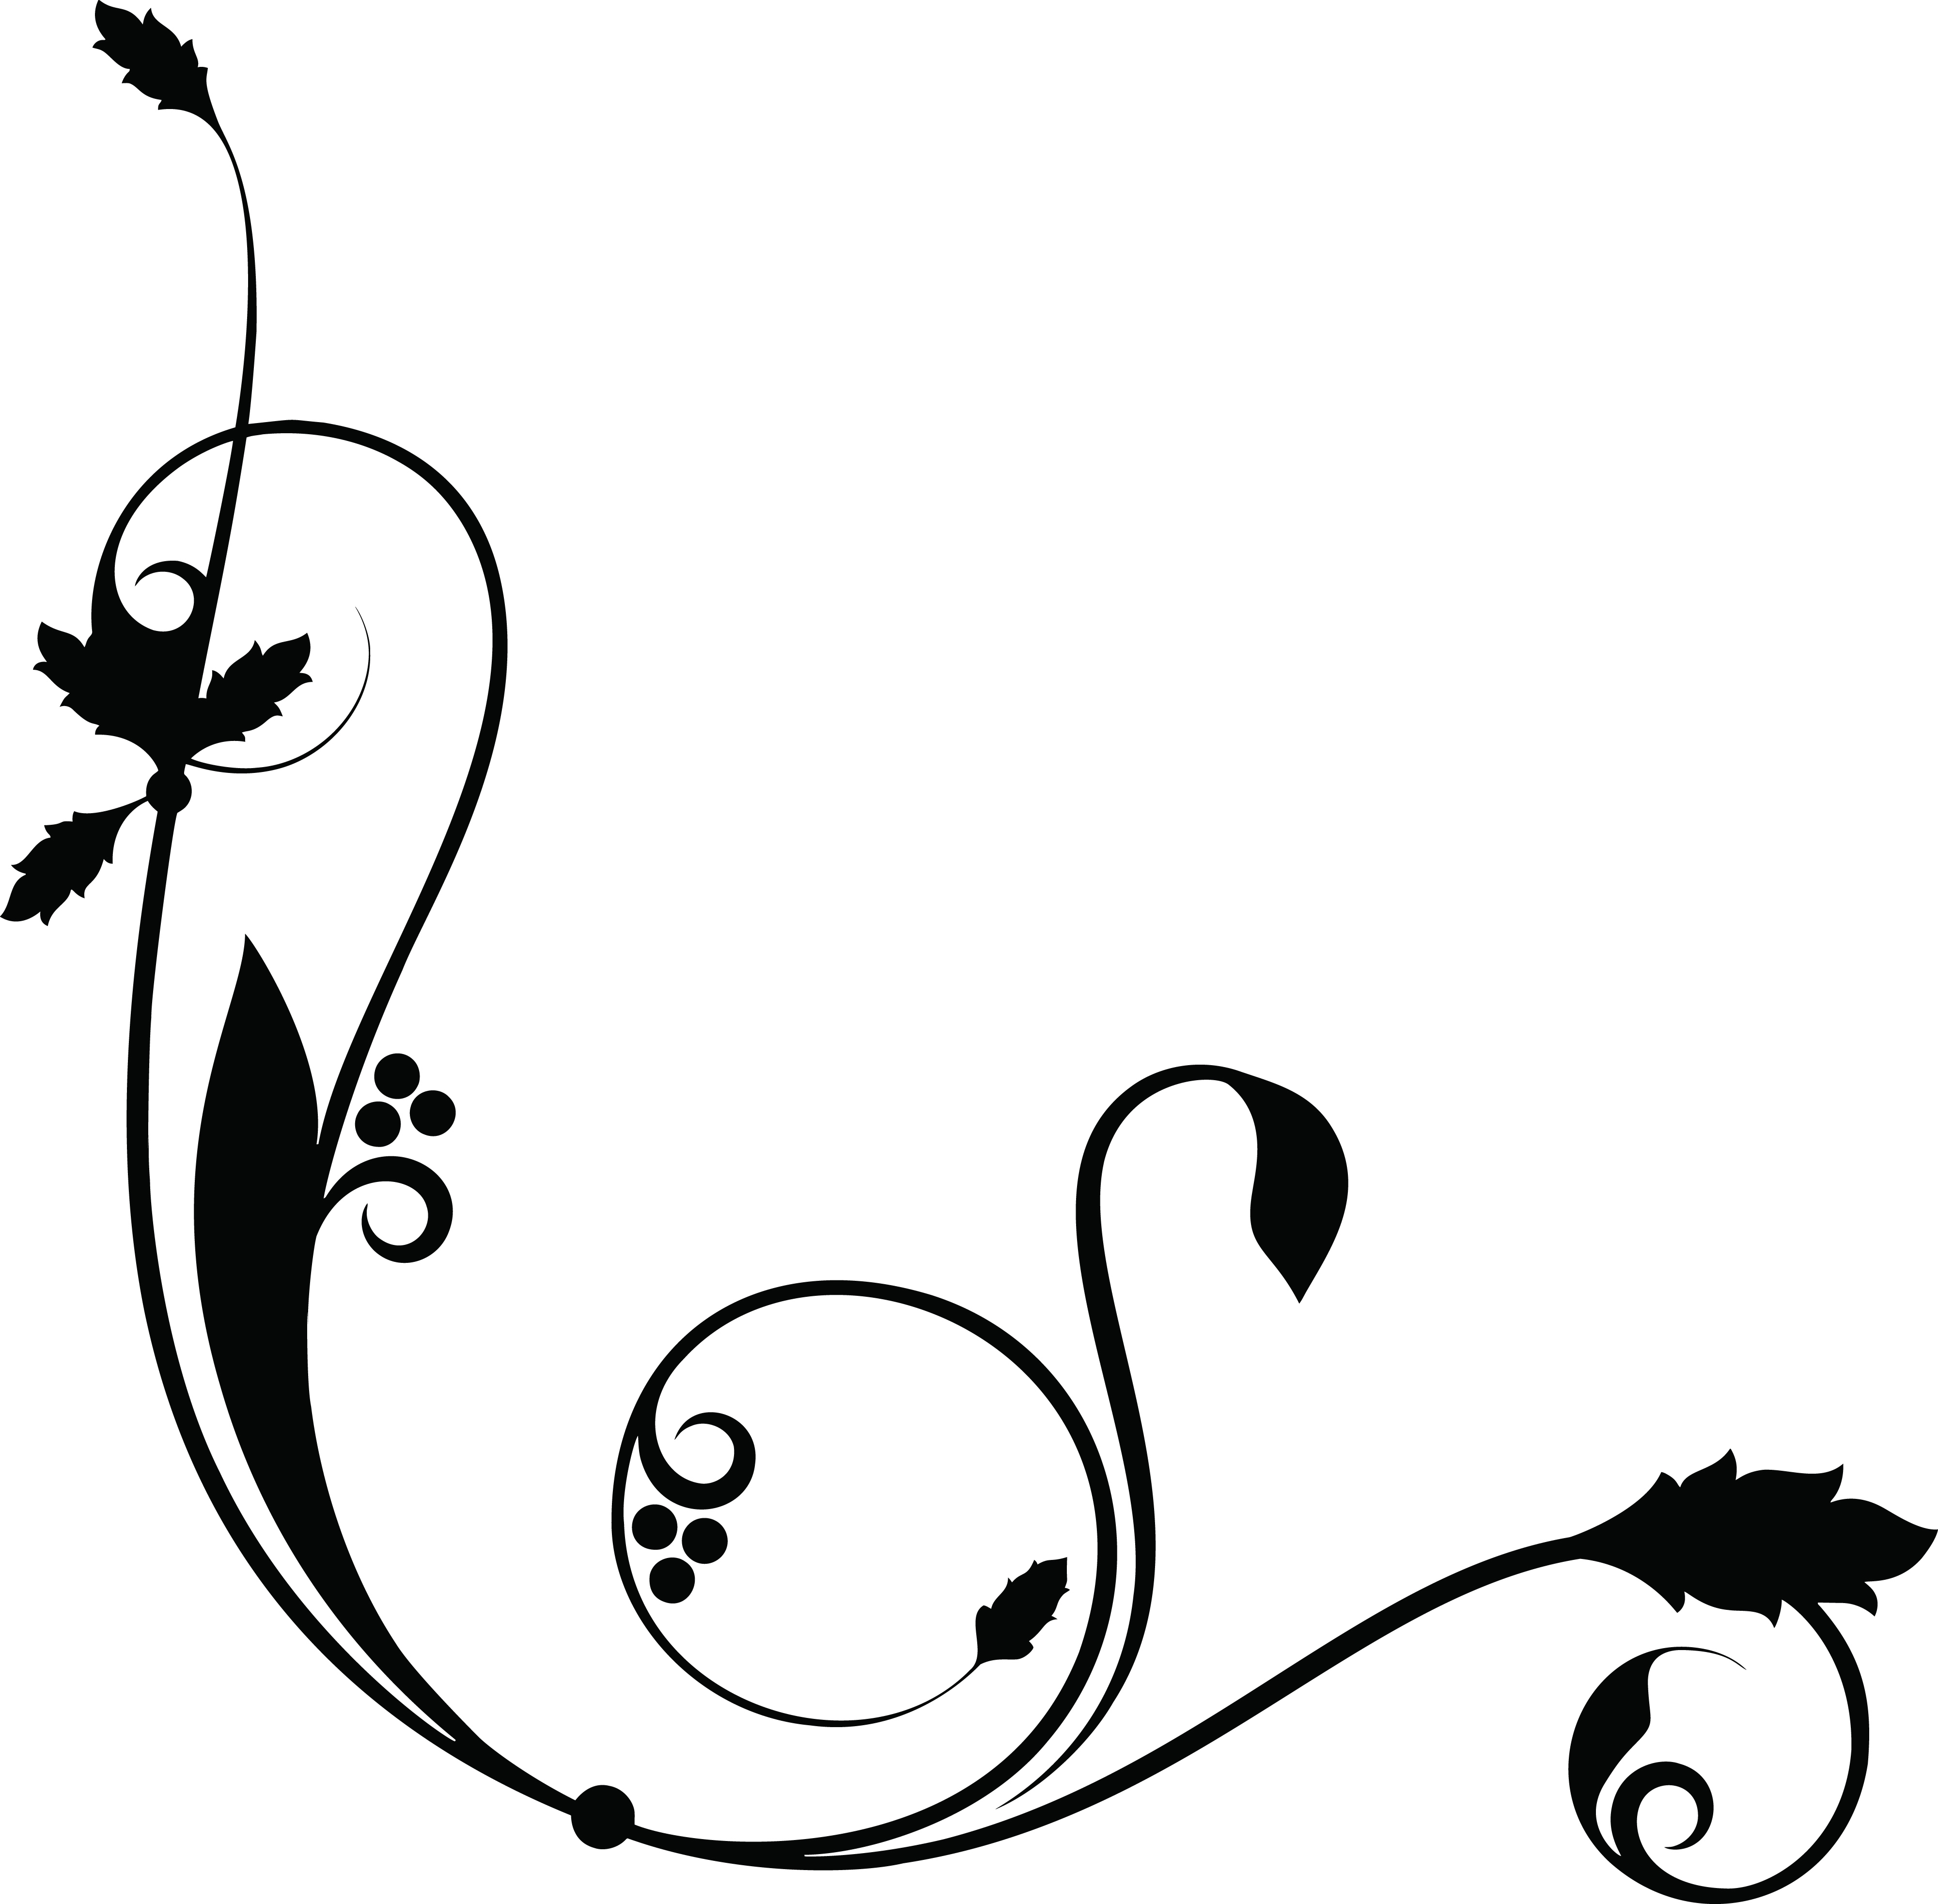 Download Free Clipart Of a Decorative Border